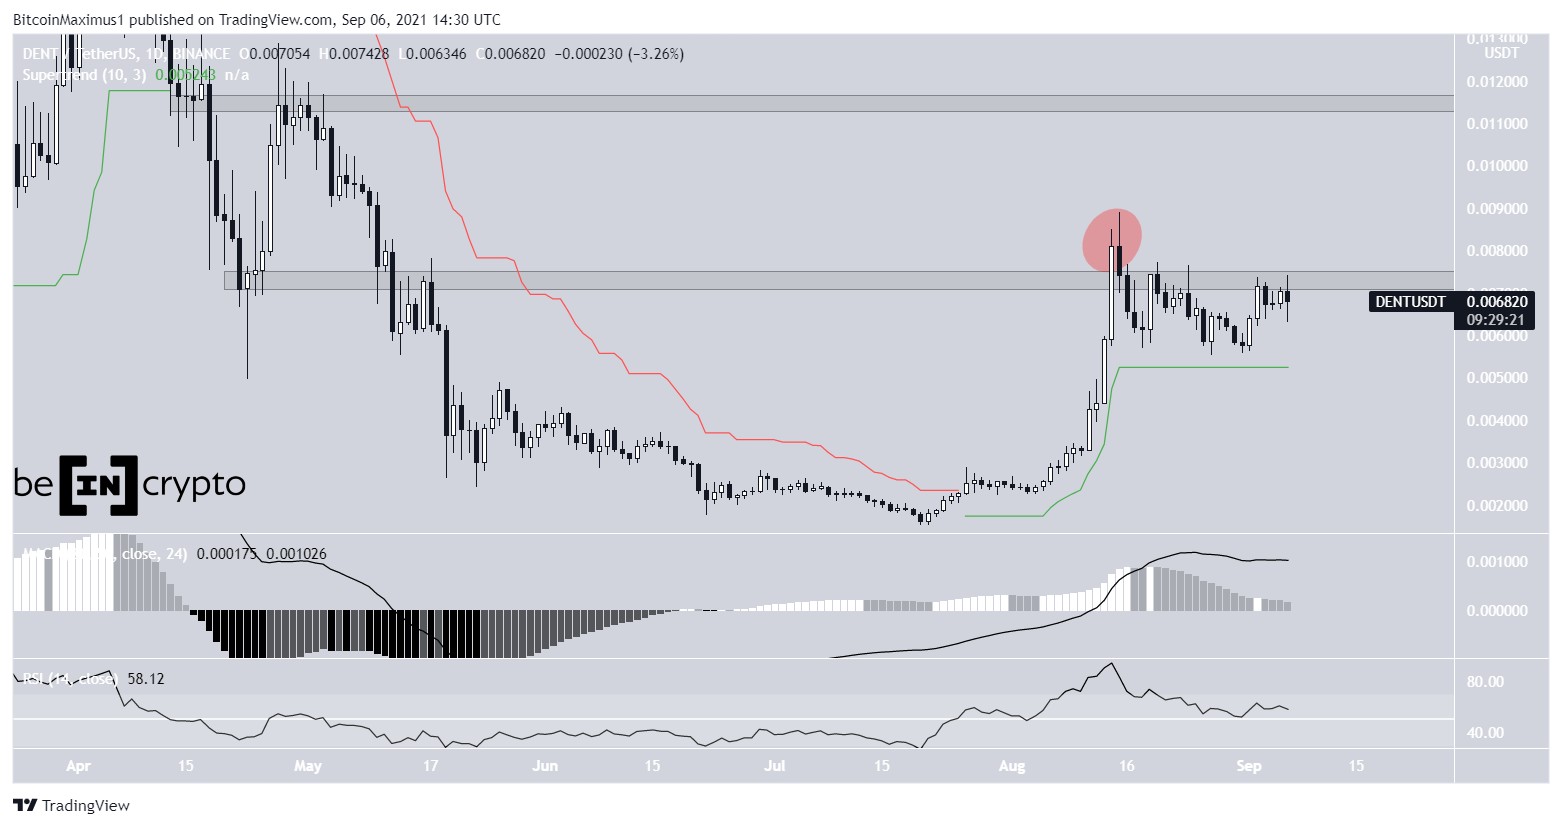 DENT Makes Another Attempt at Moving Above Resistance